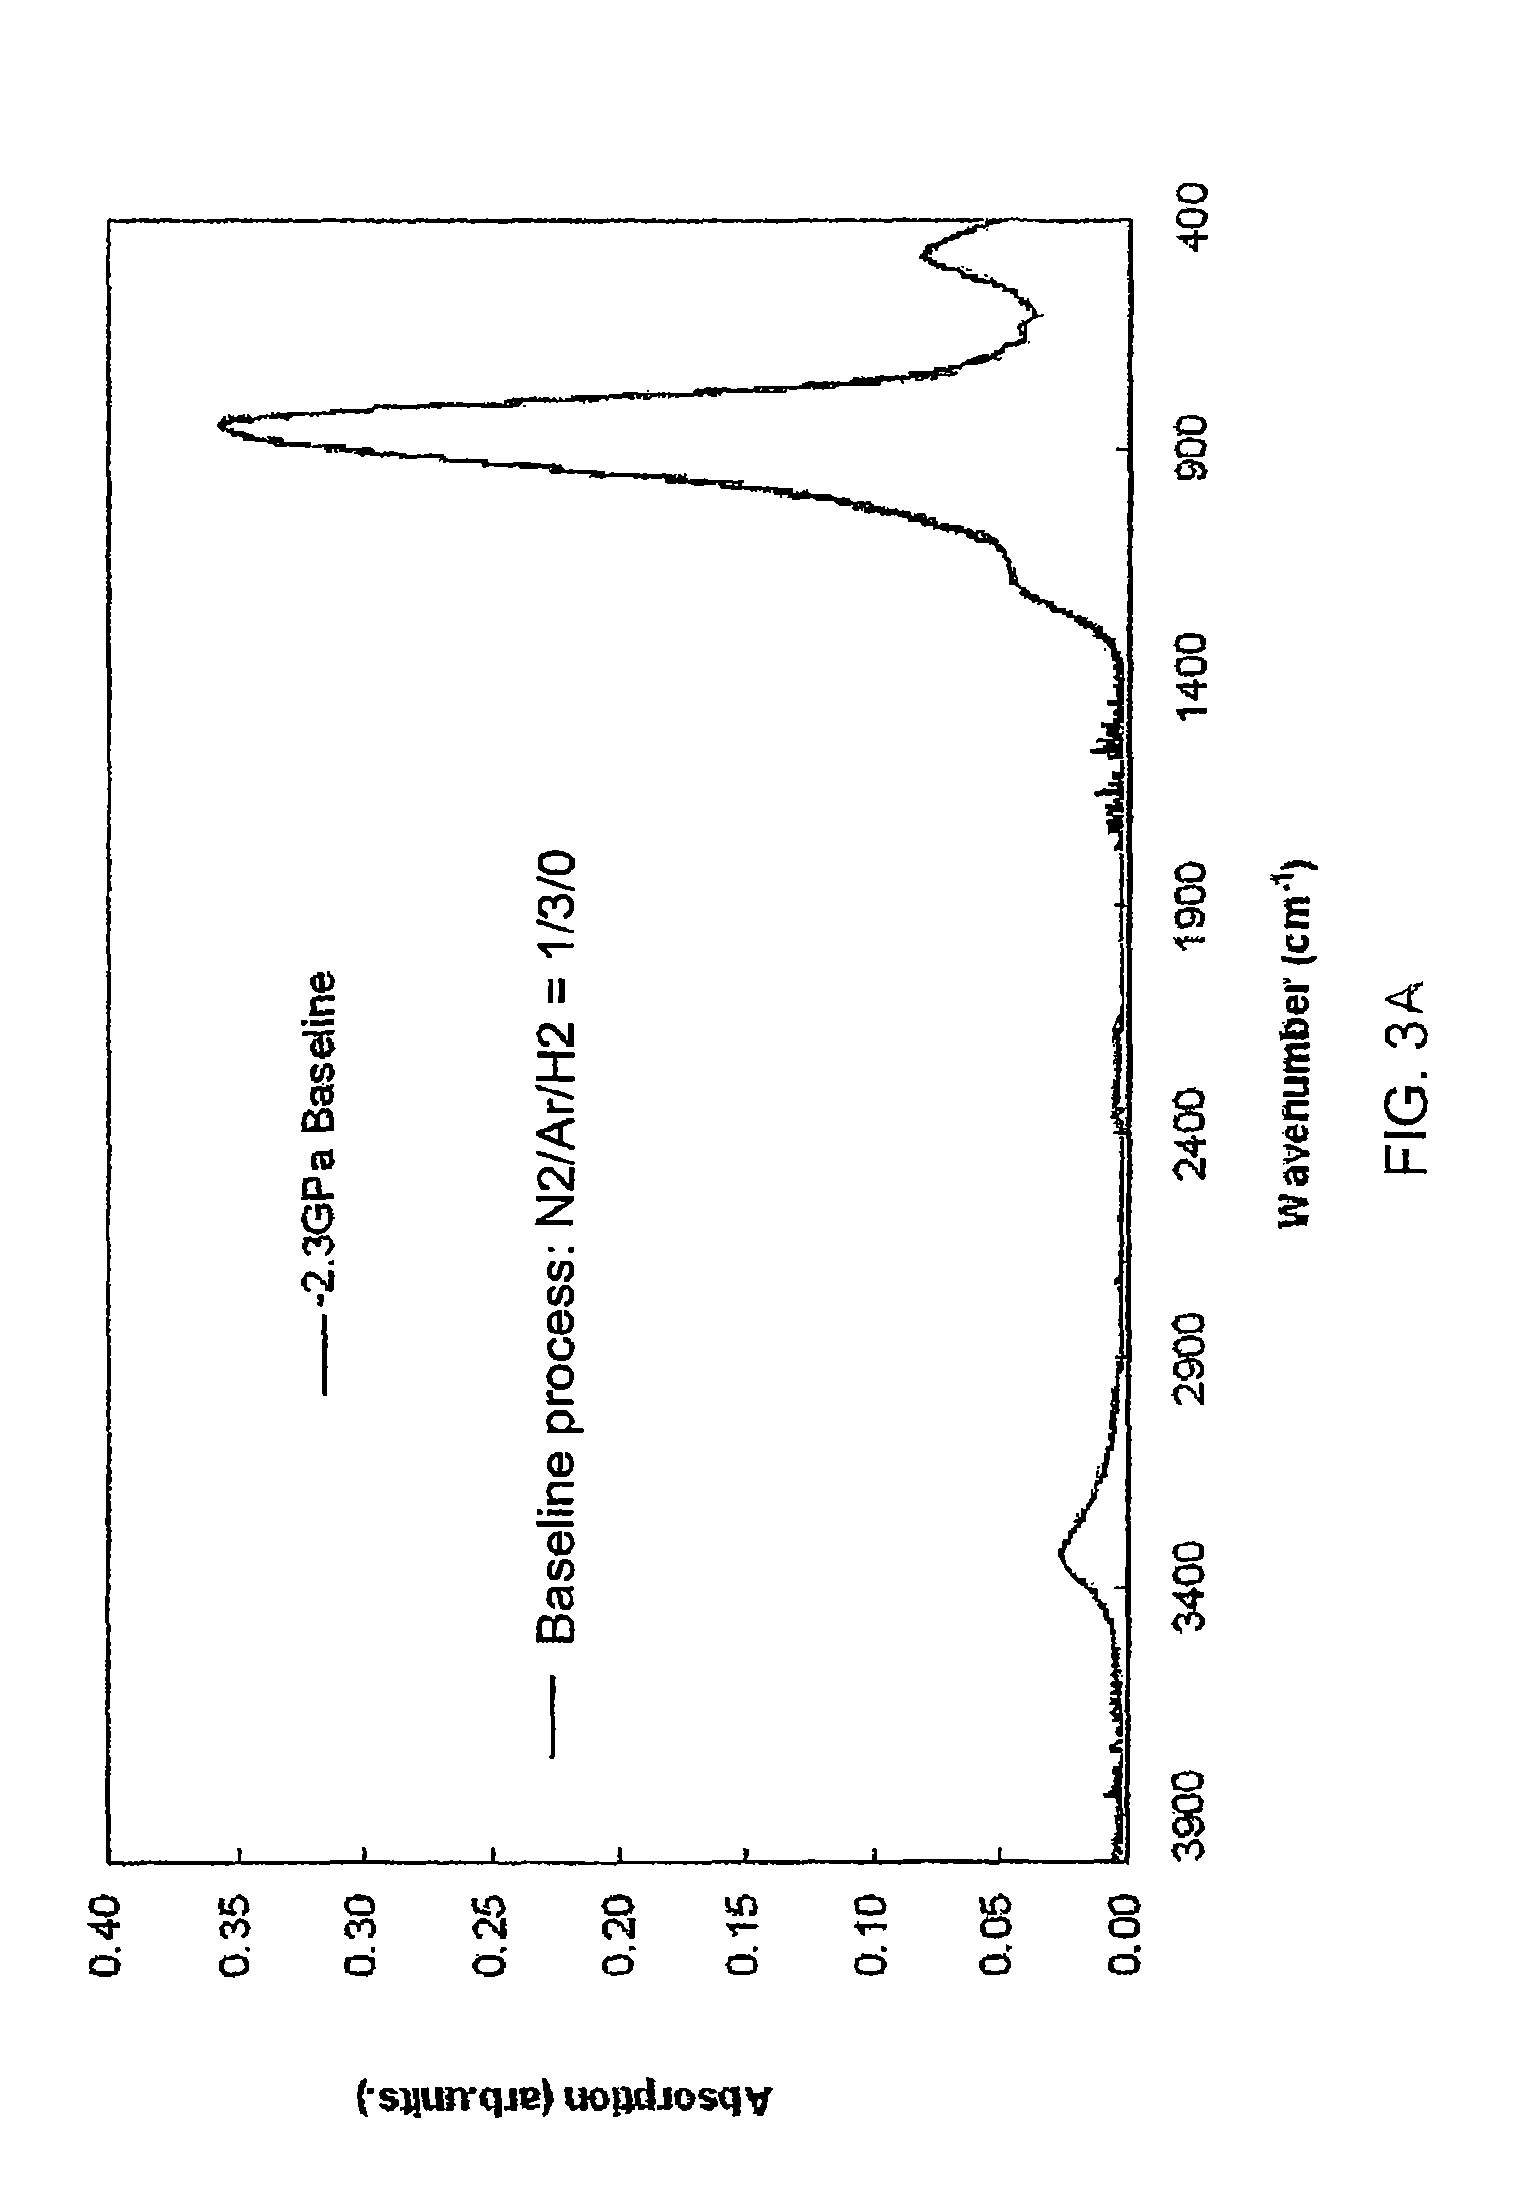 Method to increase tensile stress of silicon nitride films using a post PECVD deposition UV cure